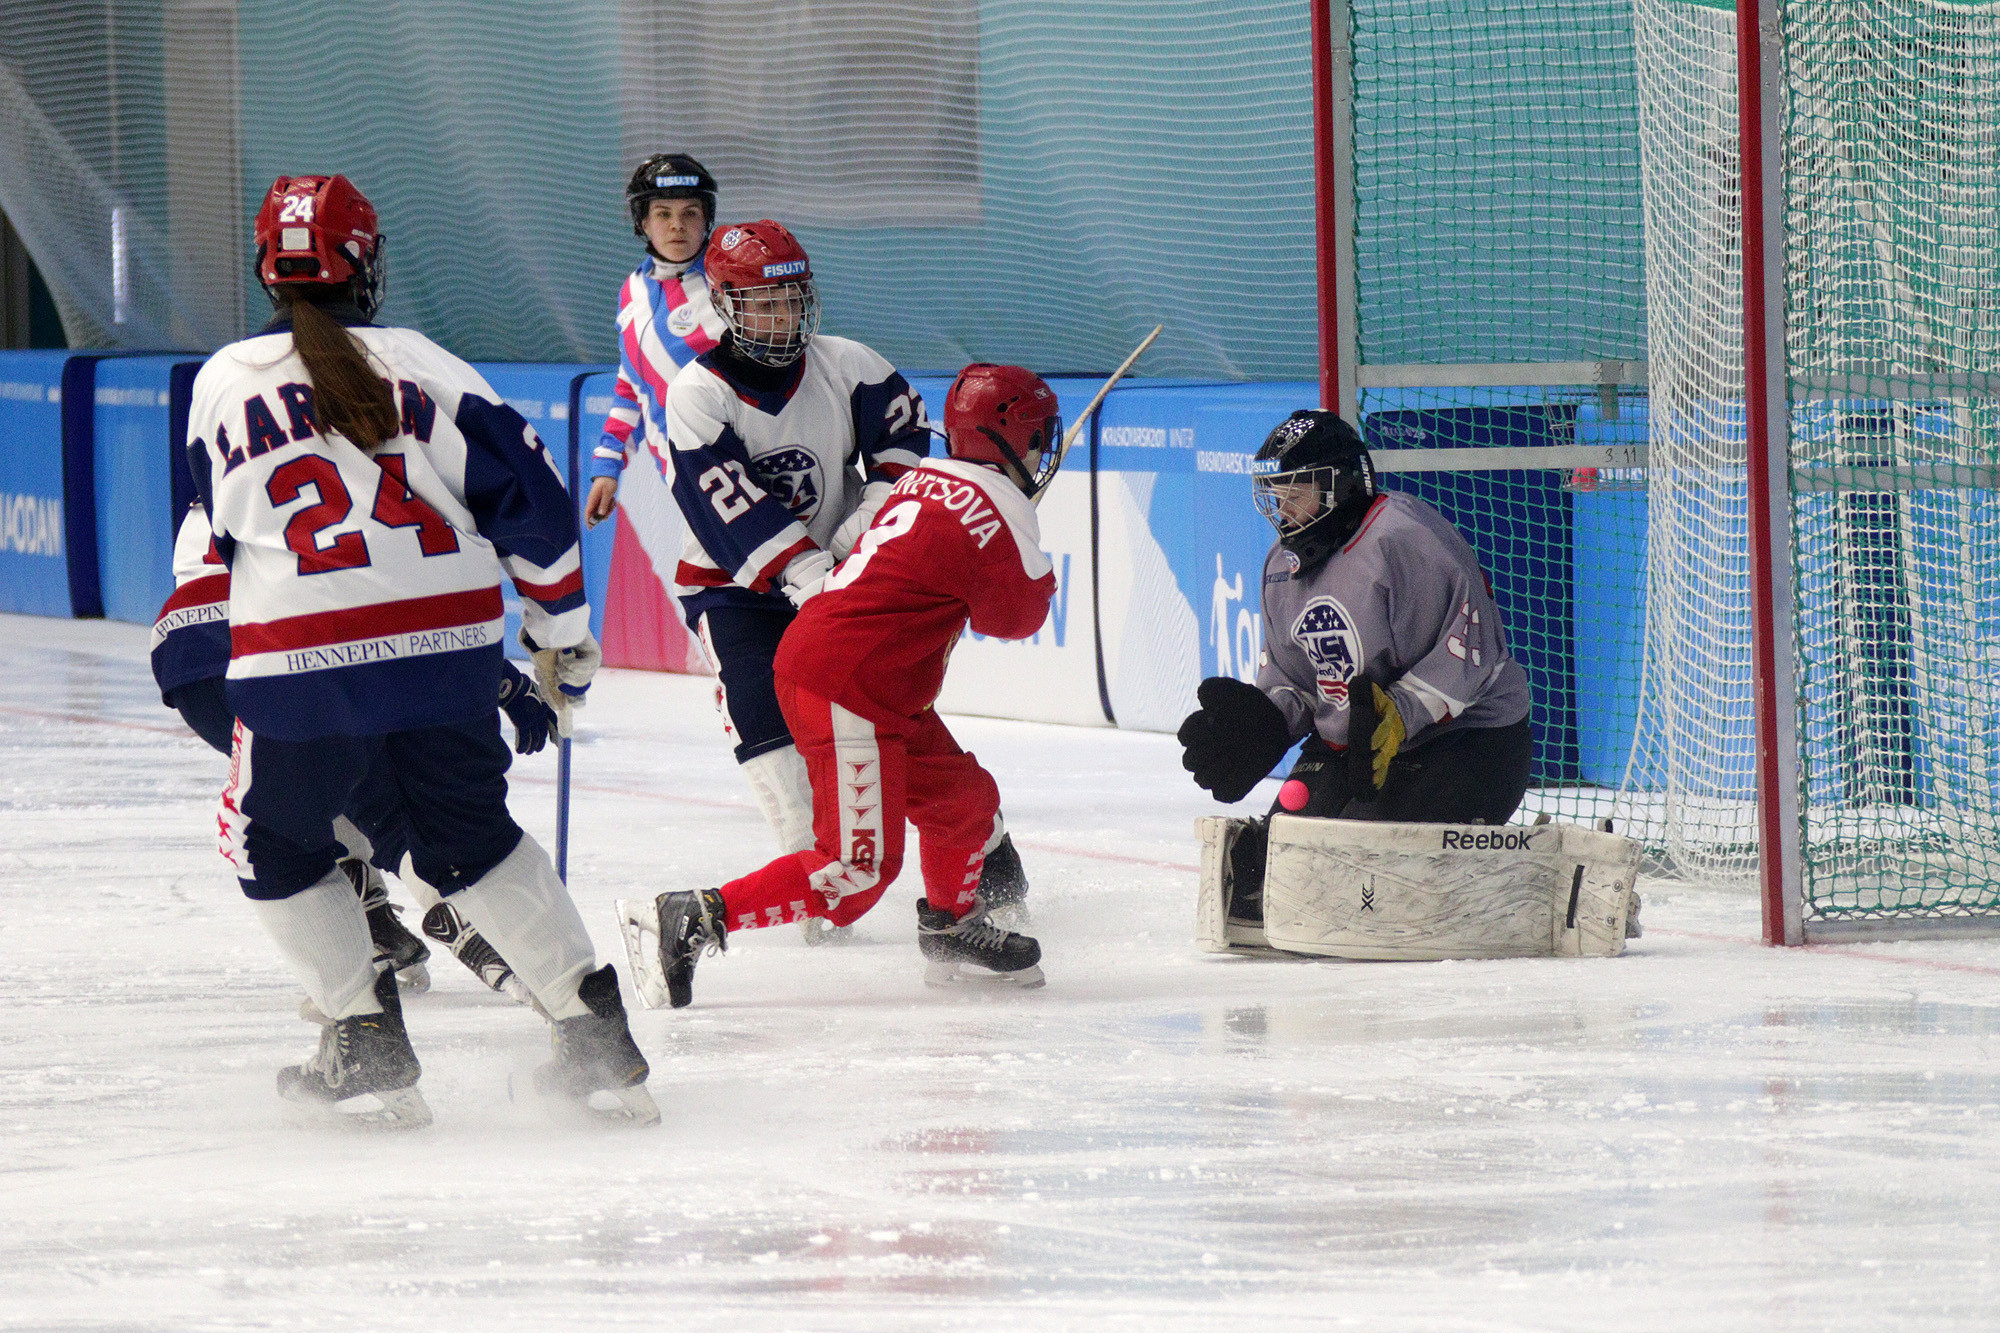 Hosts Russia defeated the United States 10-1 to progress to the final of the women's bandy competition ©Krasnoyarsk 2019